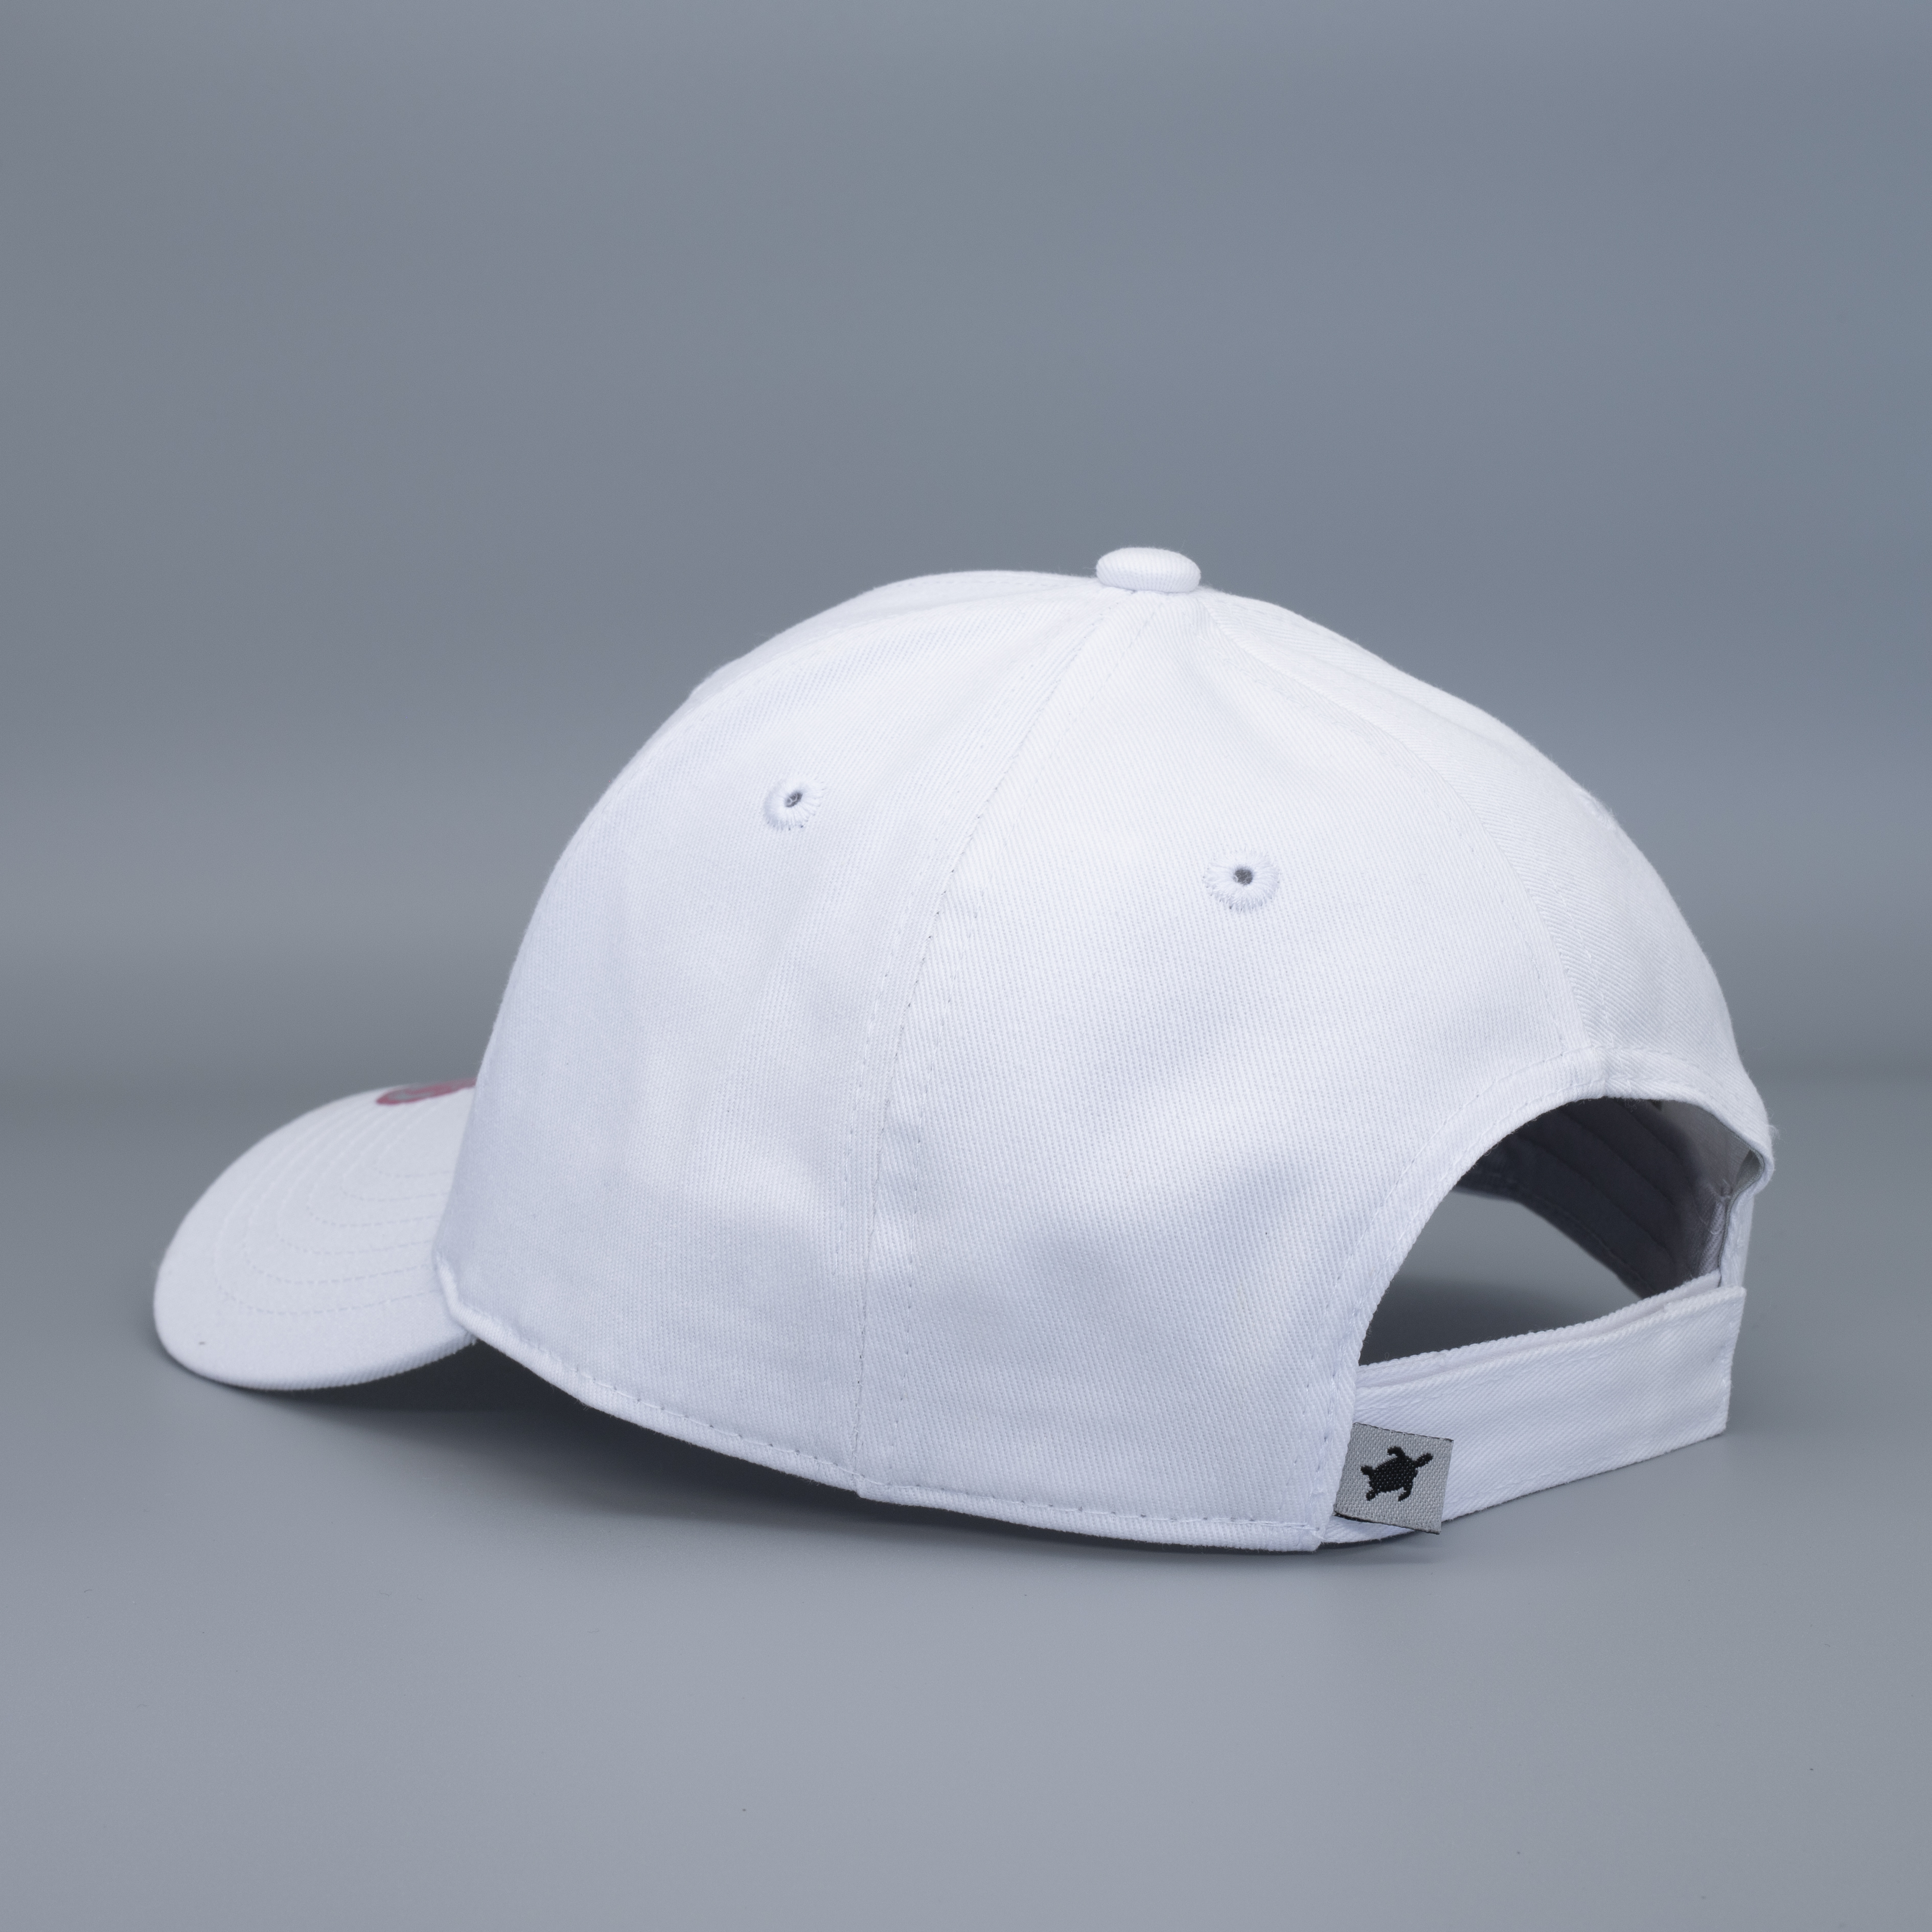 Smith & Miller Bend Unisex Curved Cap, white